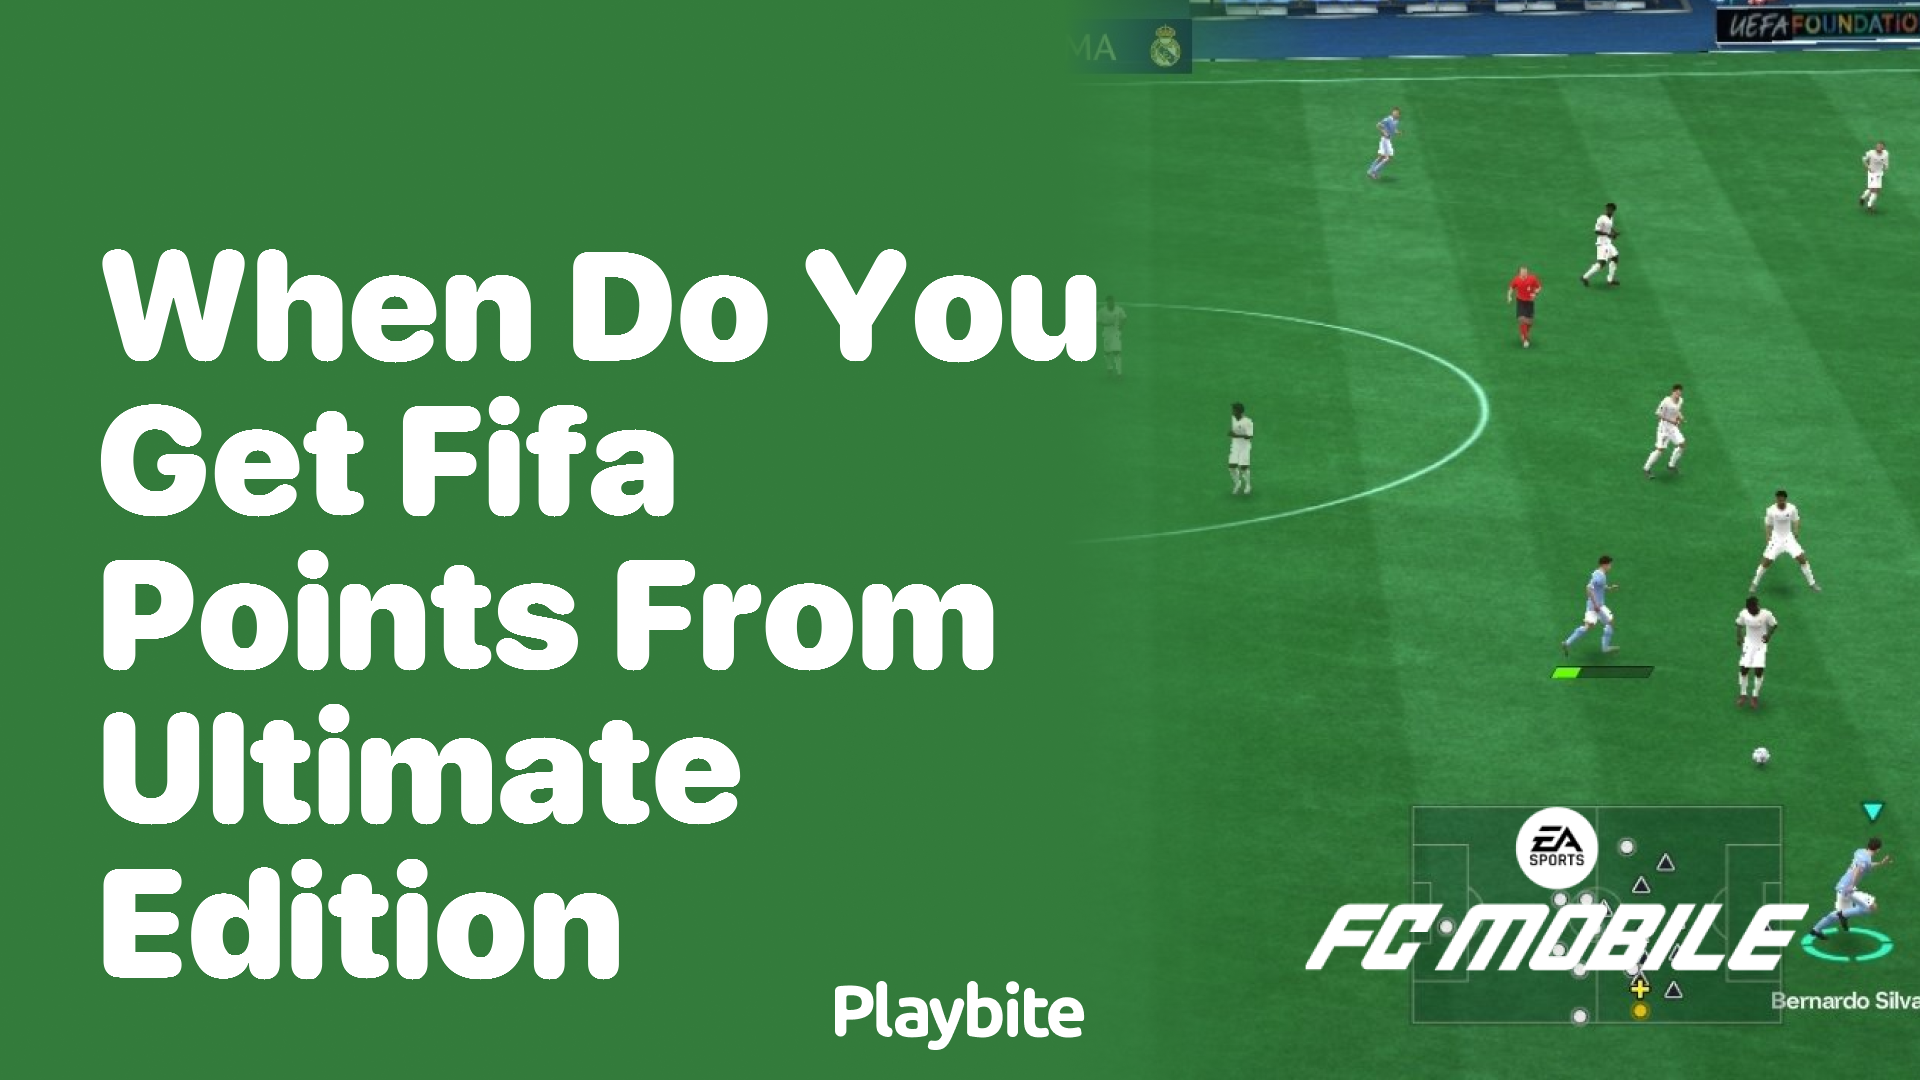 When Do You Get FIFA Points from Ultimate Edition?